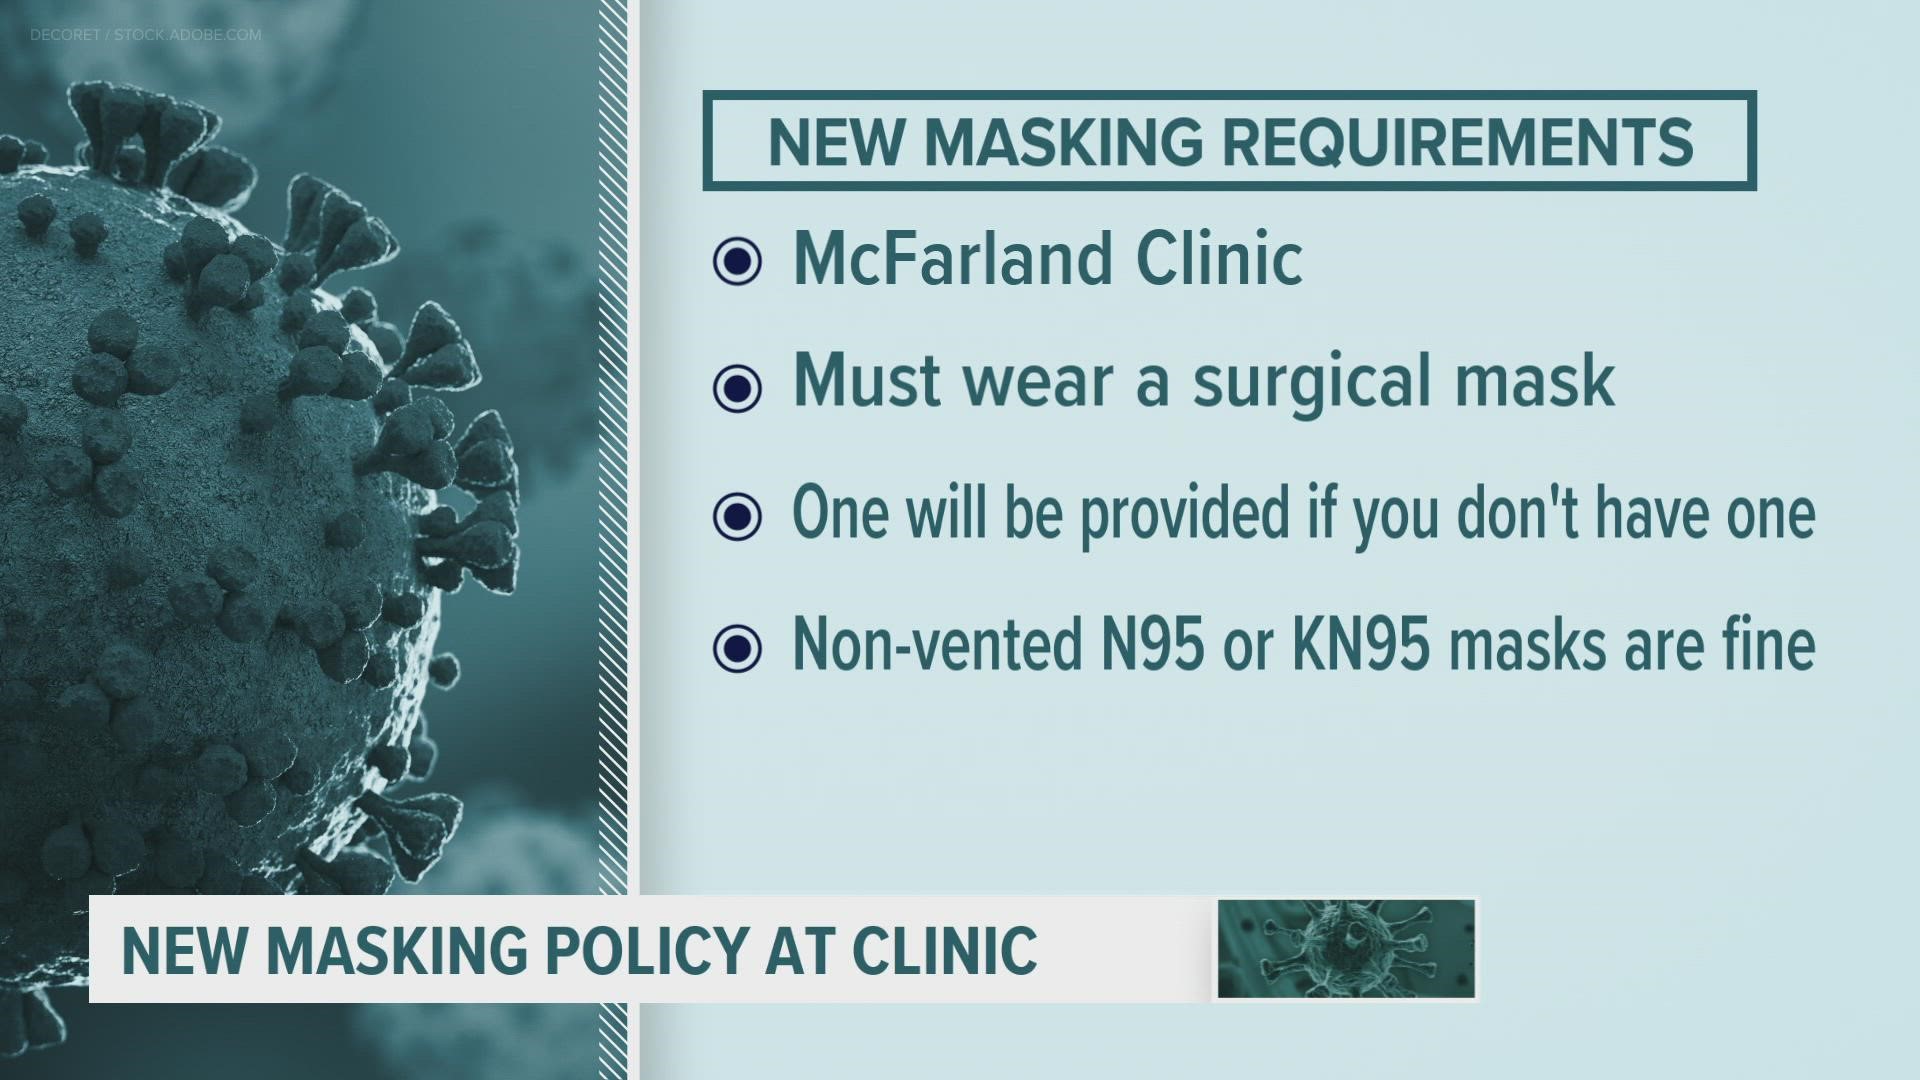 The clinic says it will provide surgical masks to patients who don't have them.